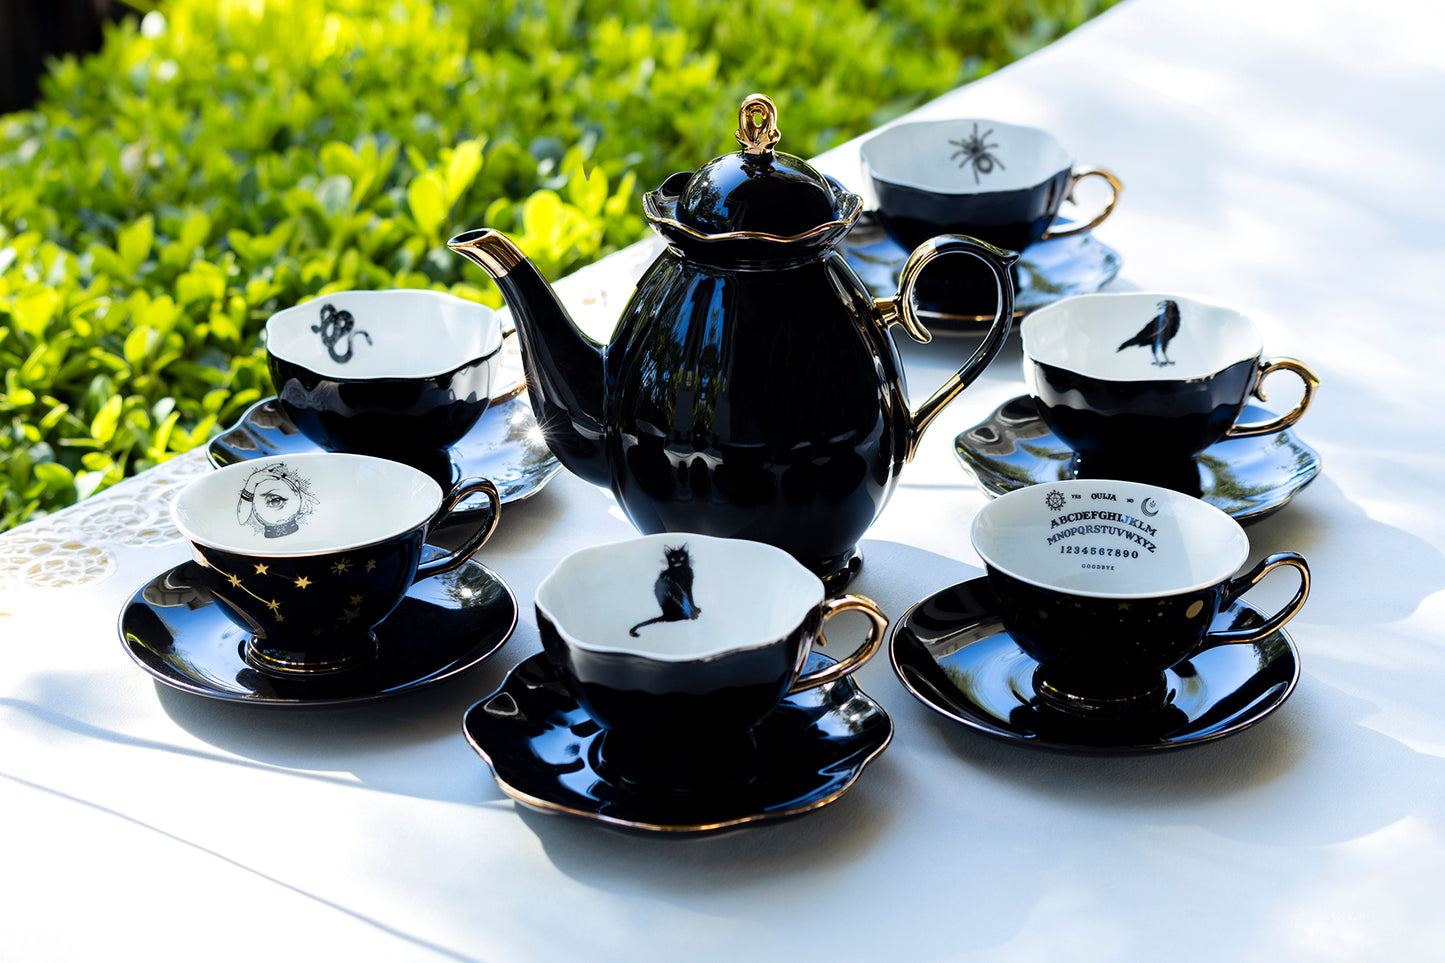 Black Gold Scallop Teapot + 6 Assorted Halloween Tea Cup and Saucer Sets - Ver. B Cat, Raven, Snake, Spider, ouija, witchy crystal ball tea cups